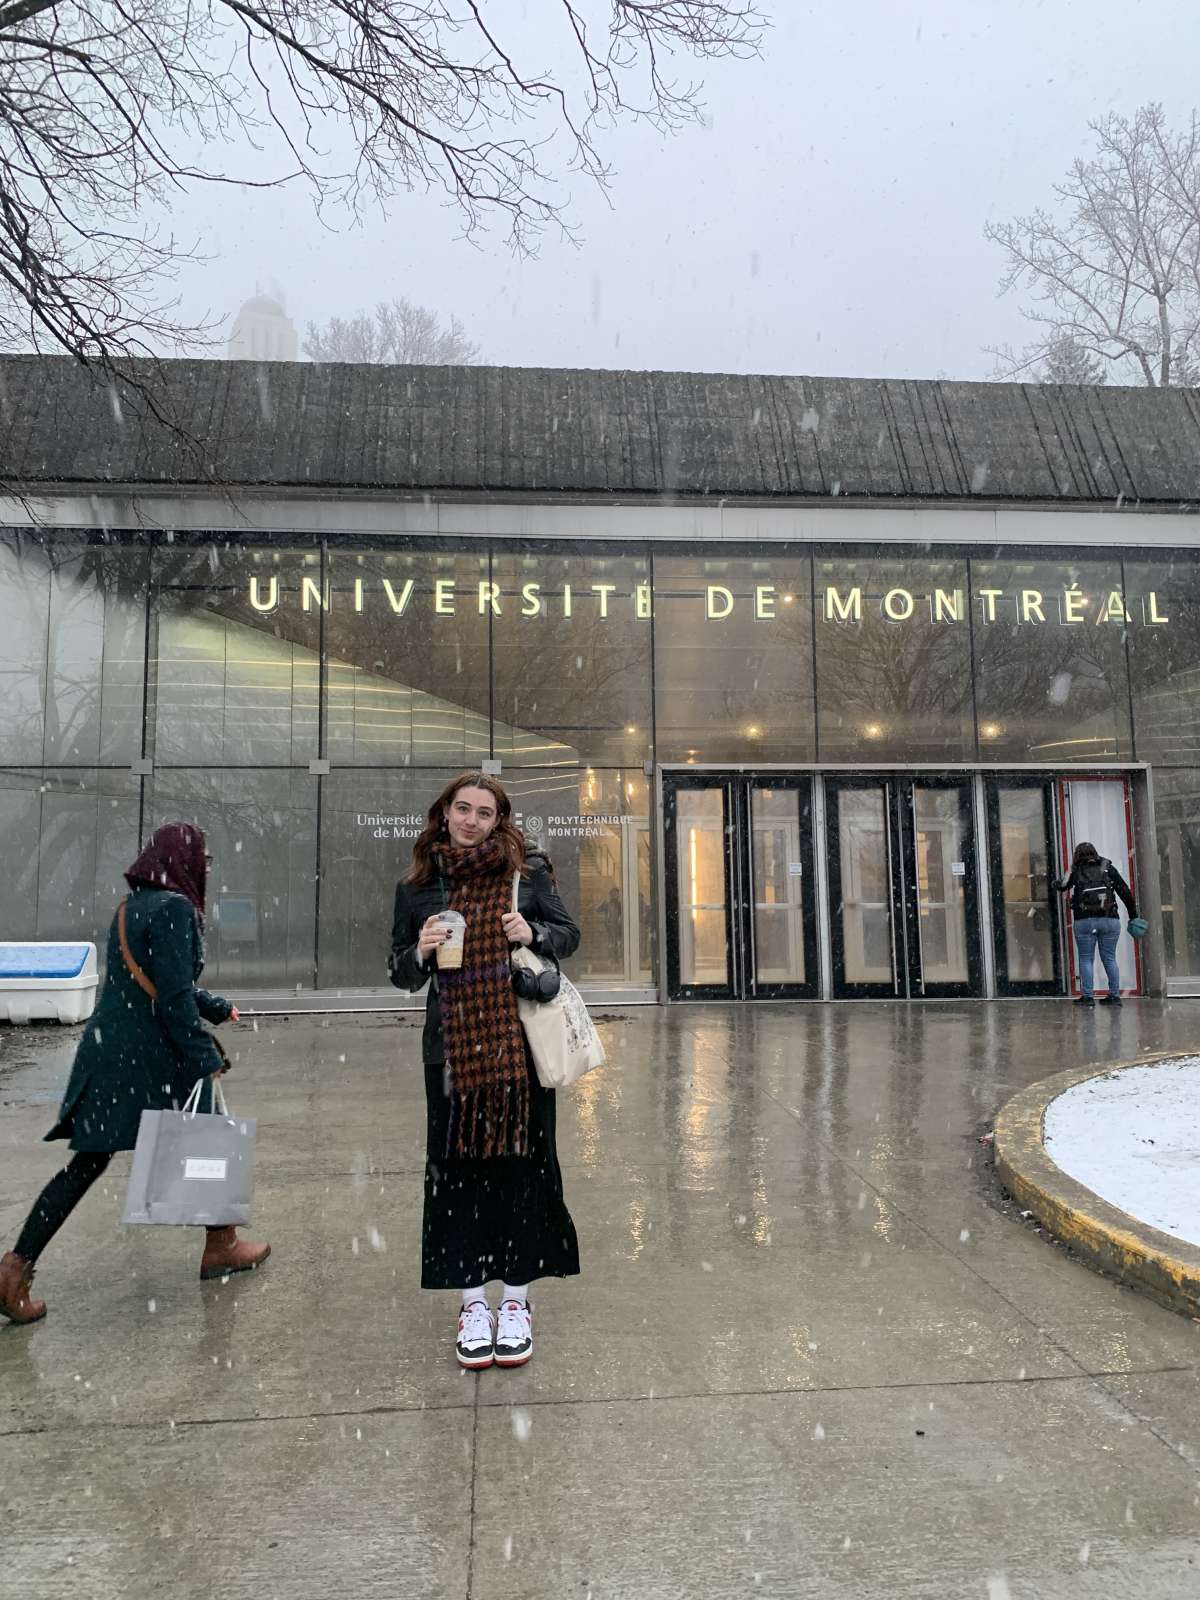 Image shows a student posing in a snow falling scene, in front of a modern building